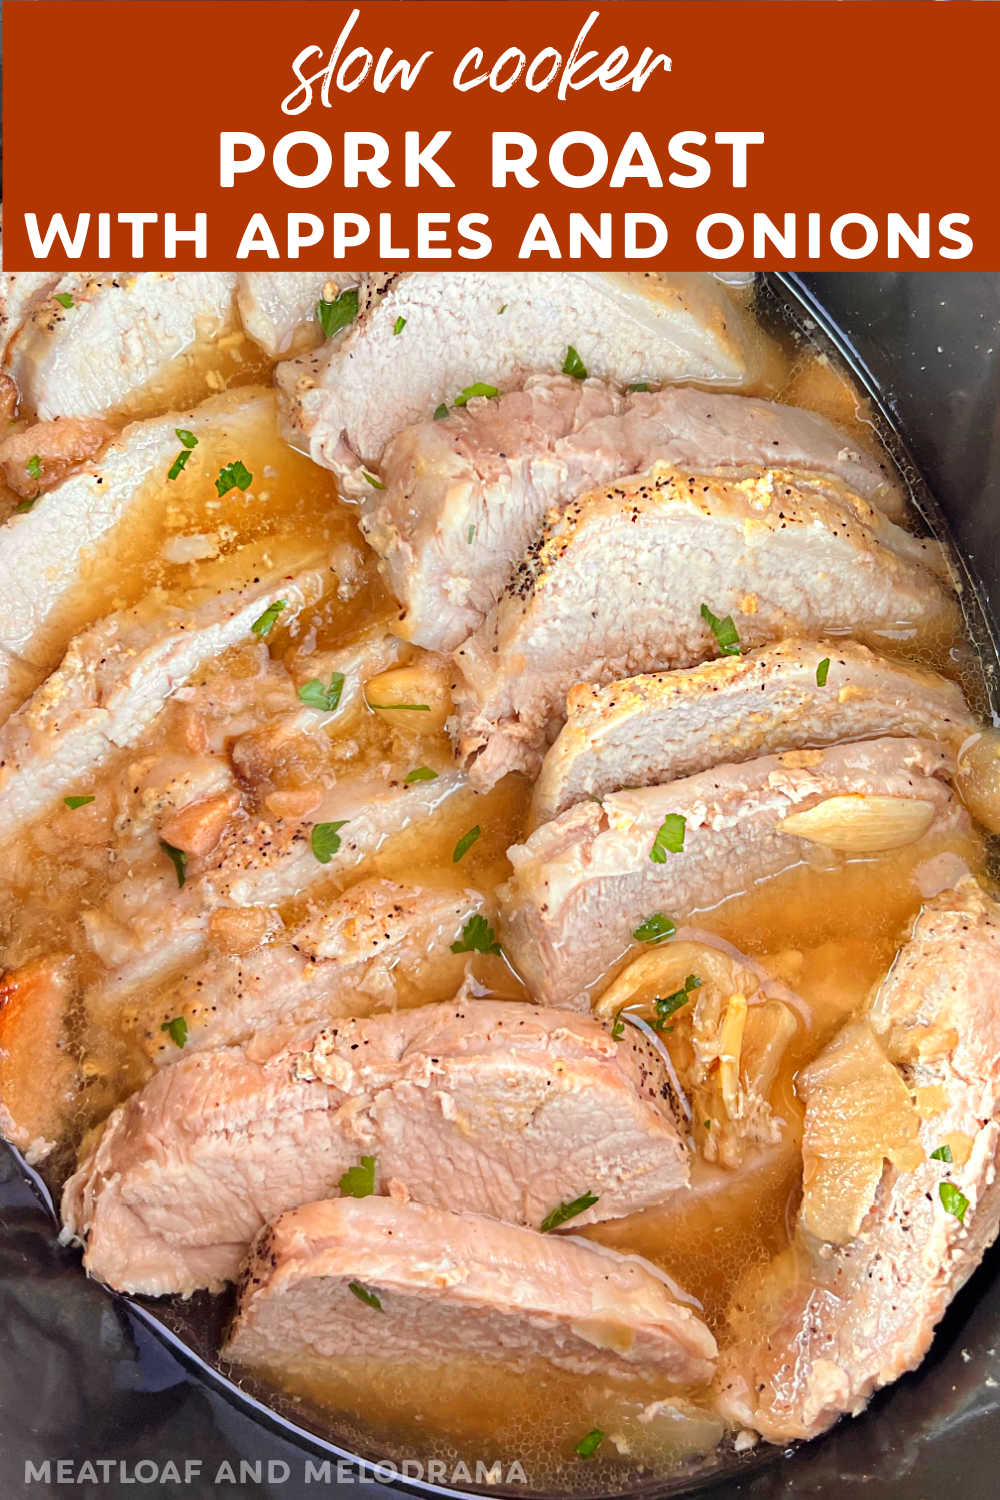 Slow Cooker Pork Roast with Apples and Onions is an easy slow cooker recipe made with tender pork loin roast, apple slices and sweet onions. This delicious crock pot recipe is perfect for busy weeknights or Sunday dinners via @meamel